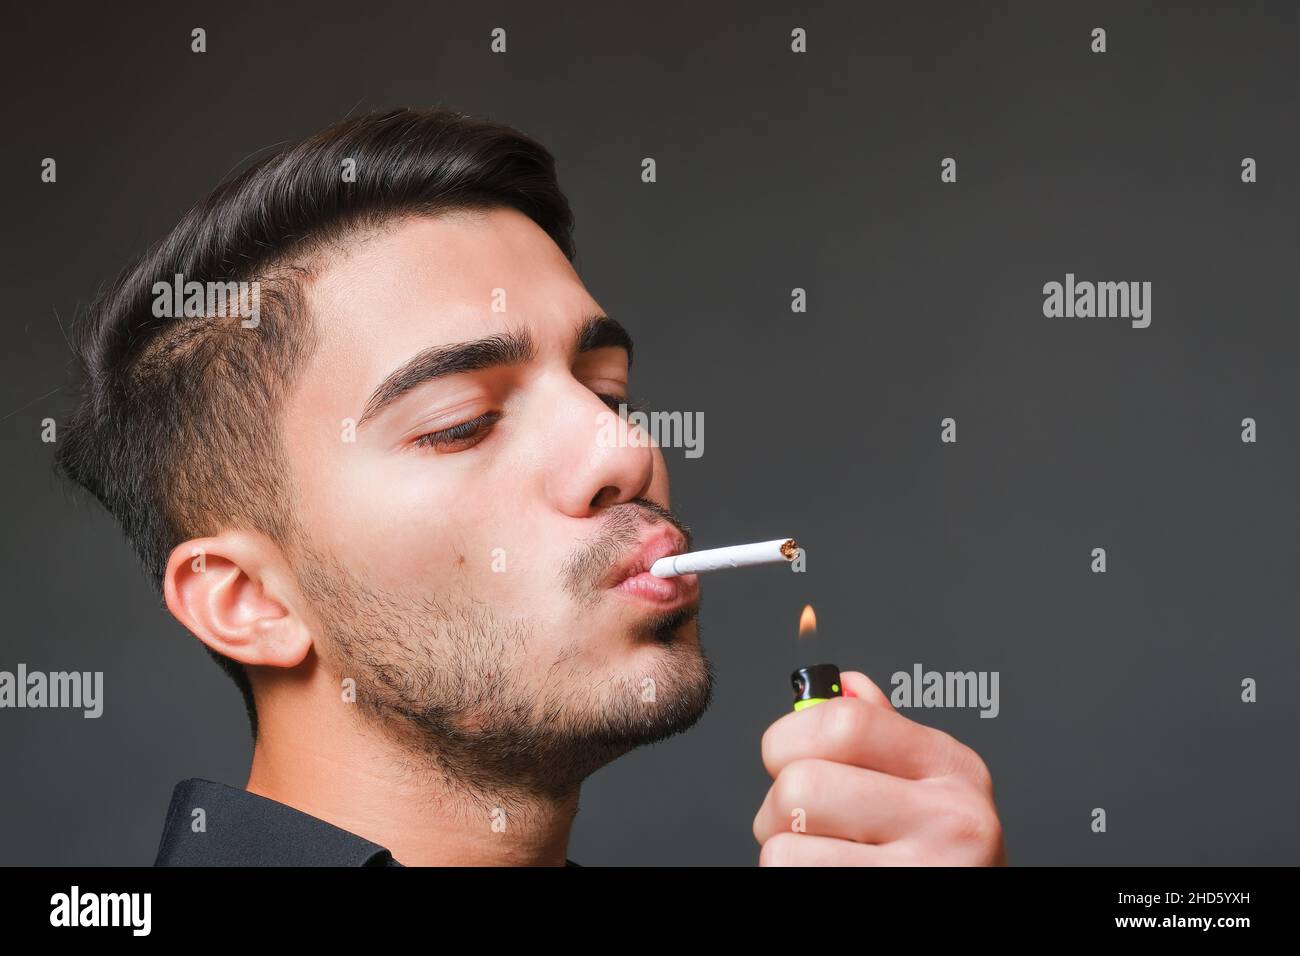 Young handsome unshaven guy lighting up cigarette Stock Photo